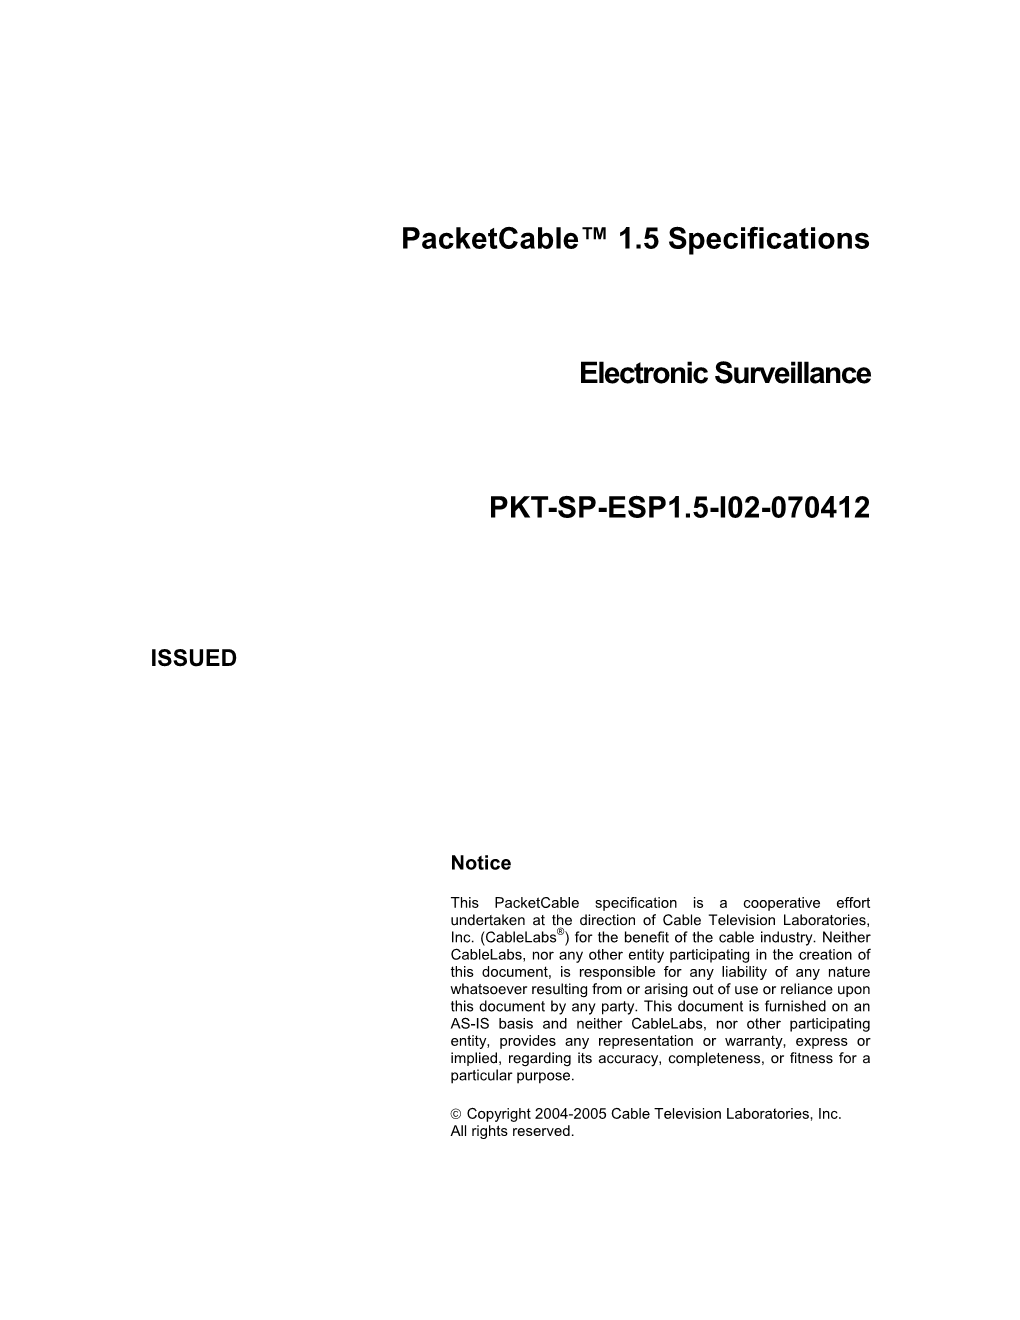 Packetcable™ 1.5 Specifications Electronic Surveillance (PKT-SP